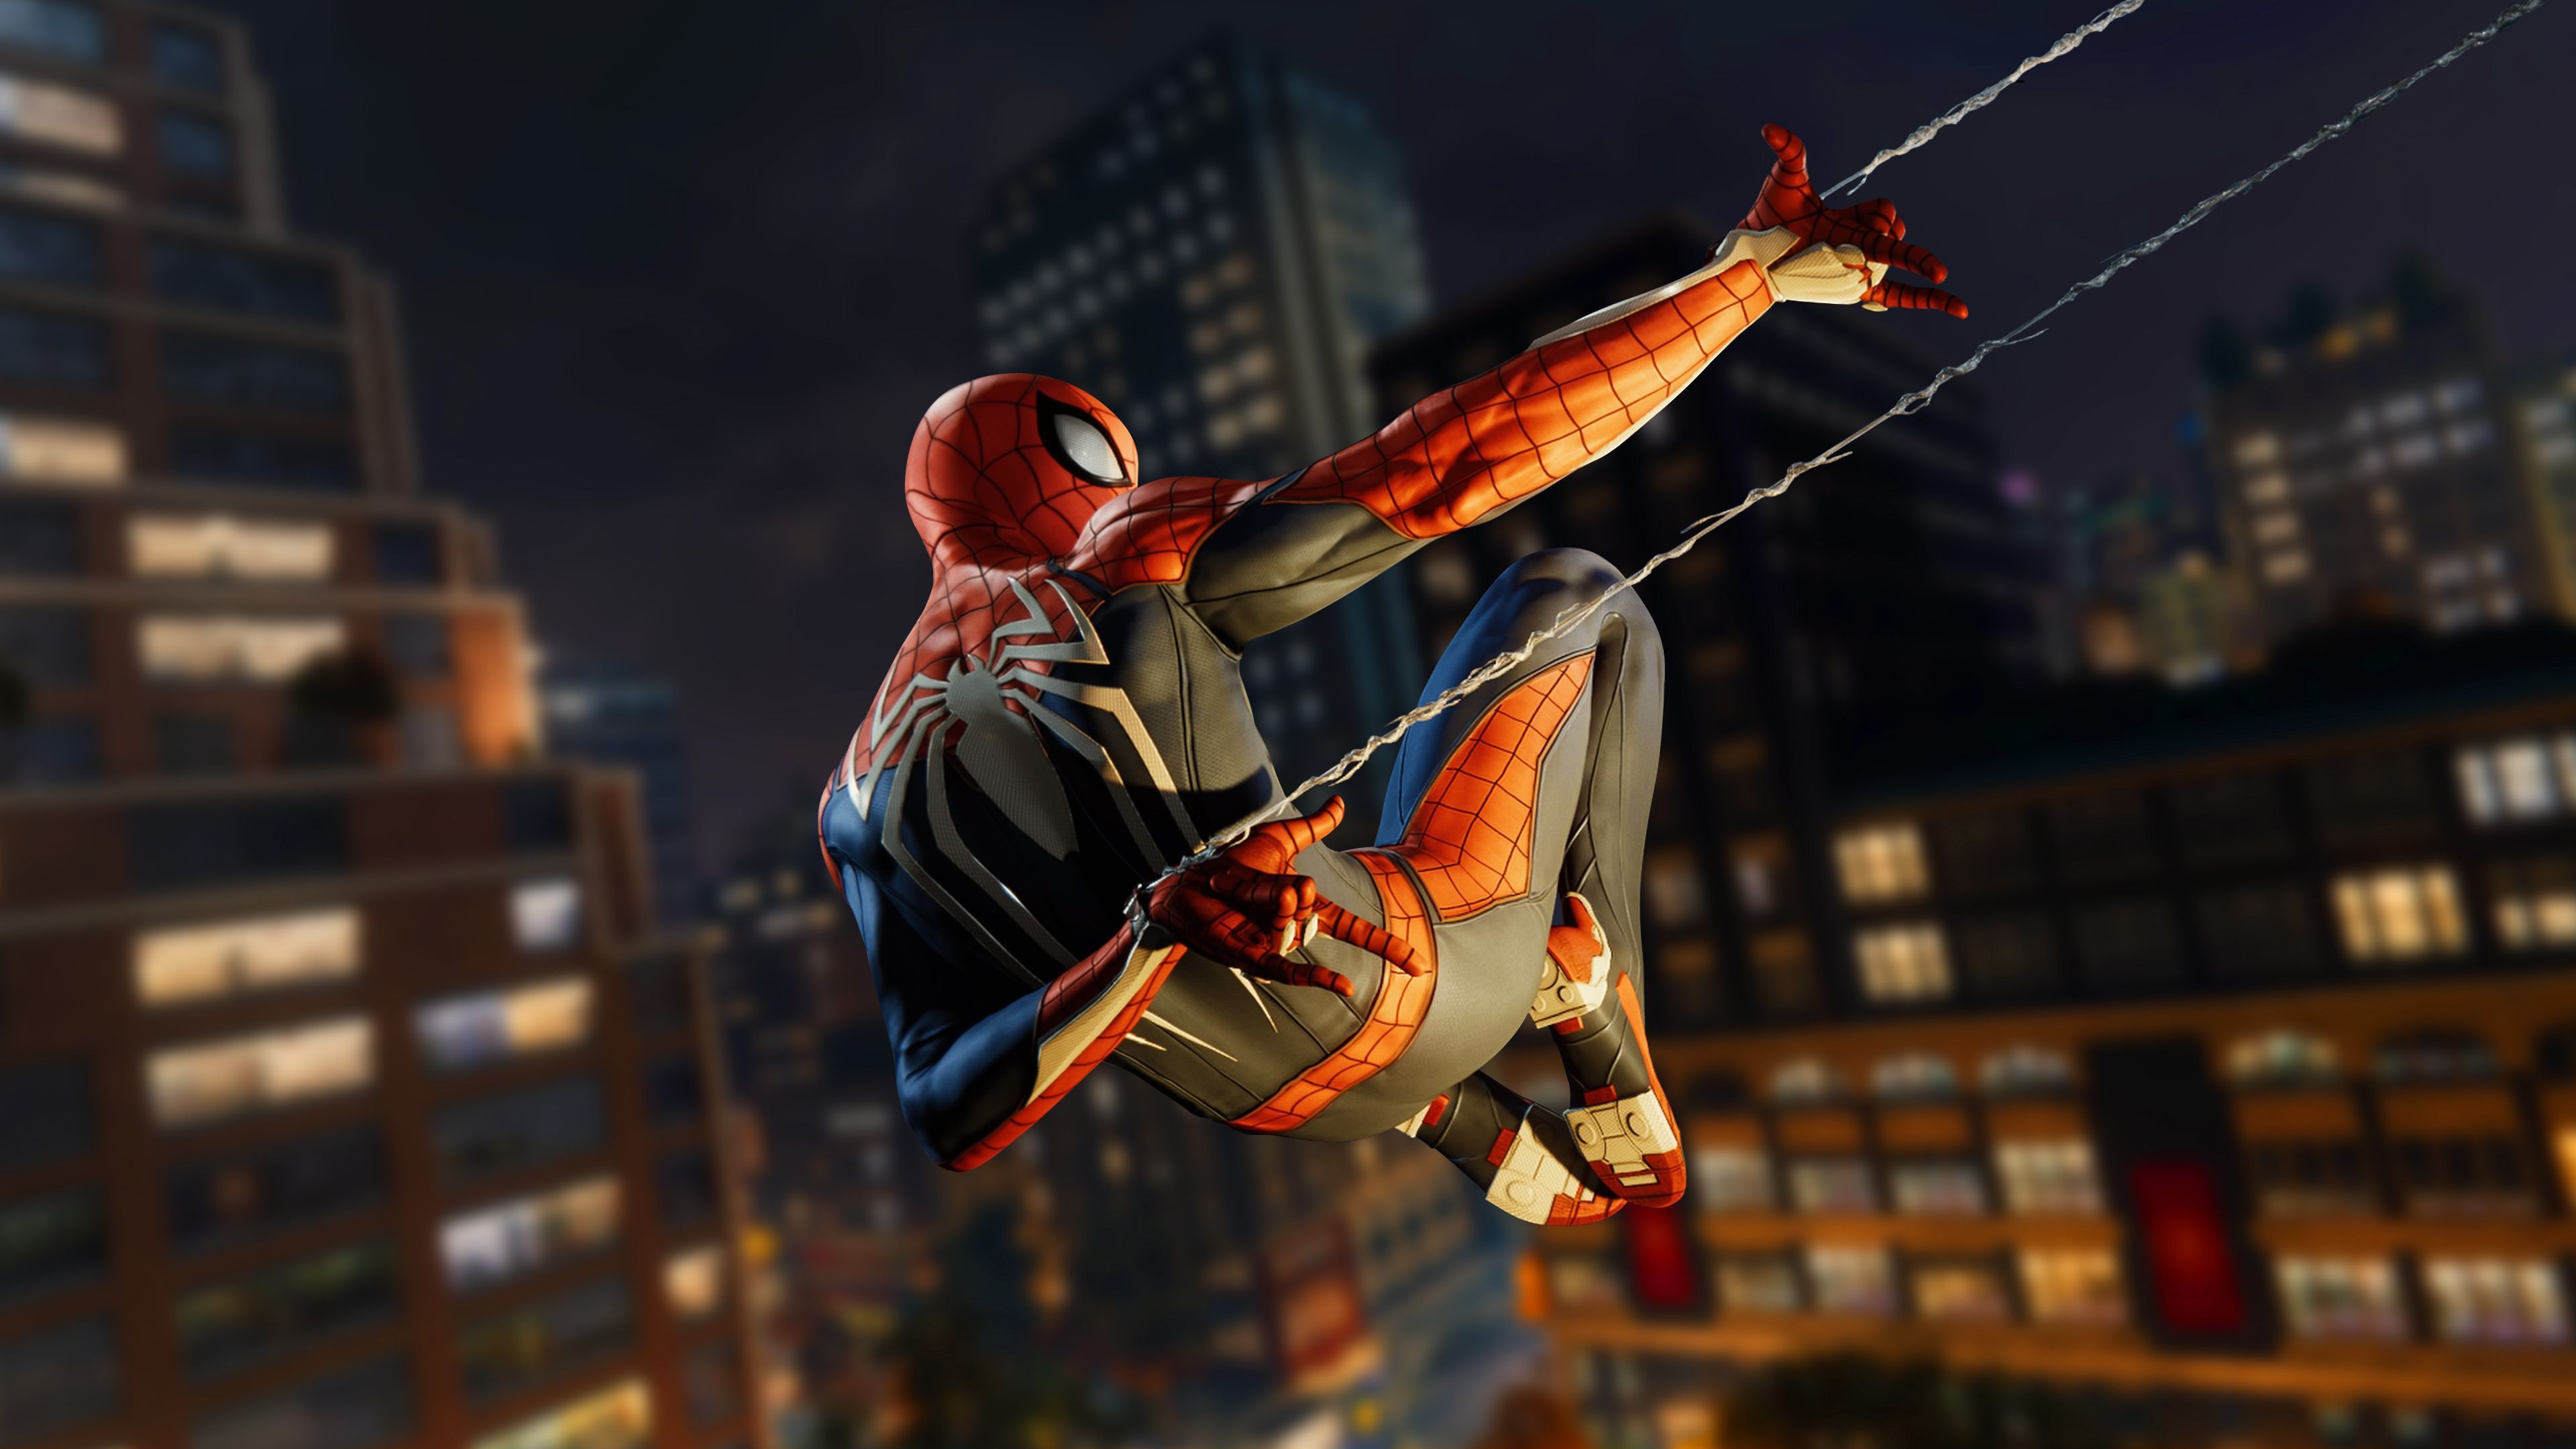 download spiderman ps5 game